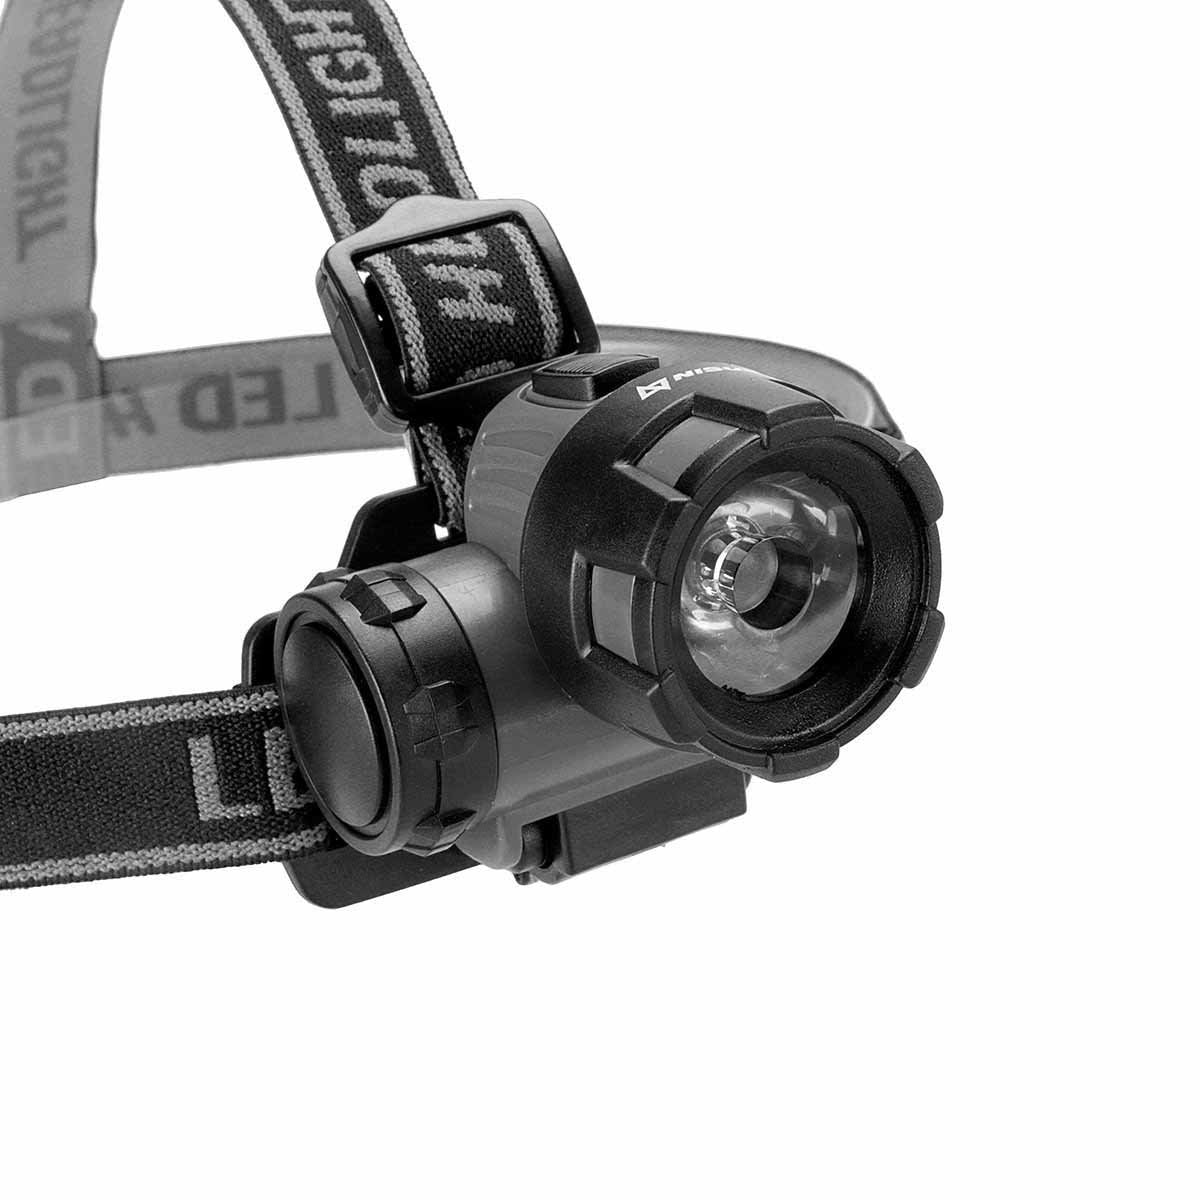 Portable LED Lightweight Headlamp for Camping